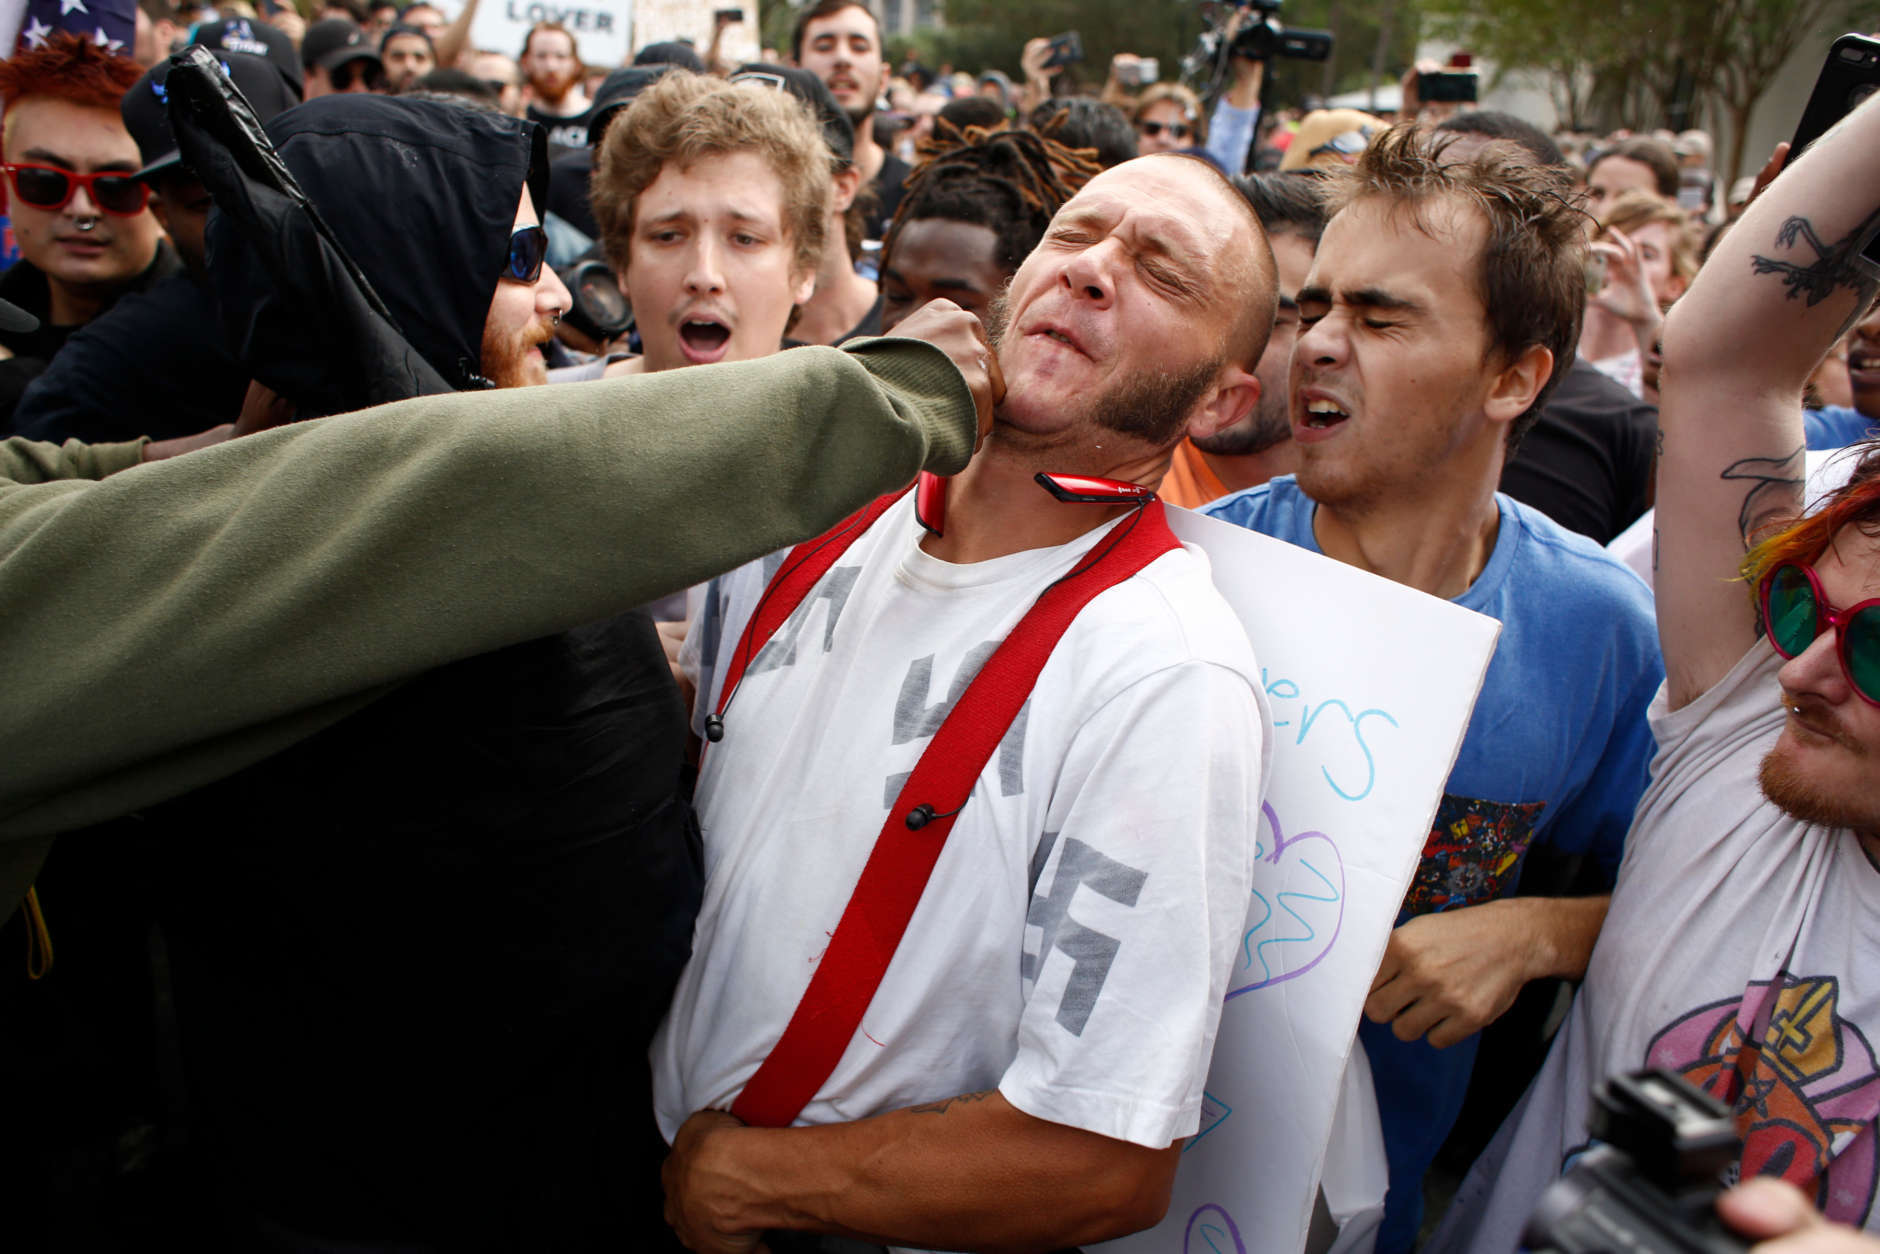 GAINESVILLE, FL - OCTOBER 19:  A man wearing a shirt with swastikas on it is punched by an unidentified member of the crowd near the site of a planned speech by white nationalist Richard Spencer, who popularized the term 'alt-right', at the University of Florida campus on October 19, 2017 in Gainesville, Florida. A state of emergency was declared on Monday by Florida Gov. Rick Scott to allow for increased law enforcement due to fears of violence. (Photo by Brian Blanco/Getty Images)